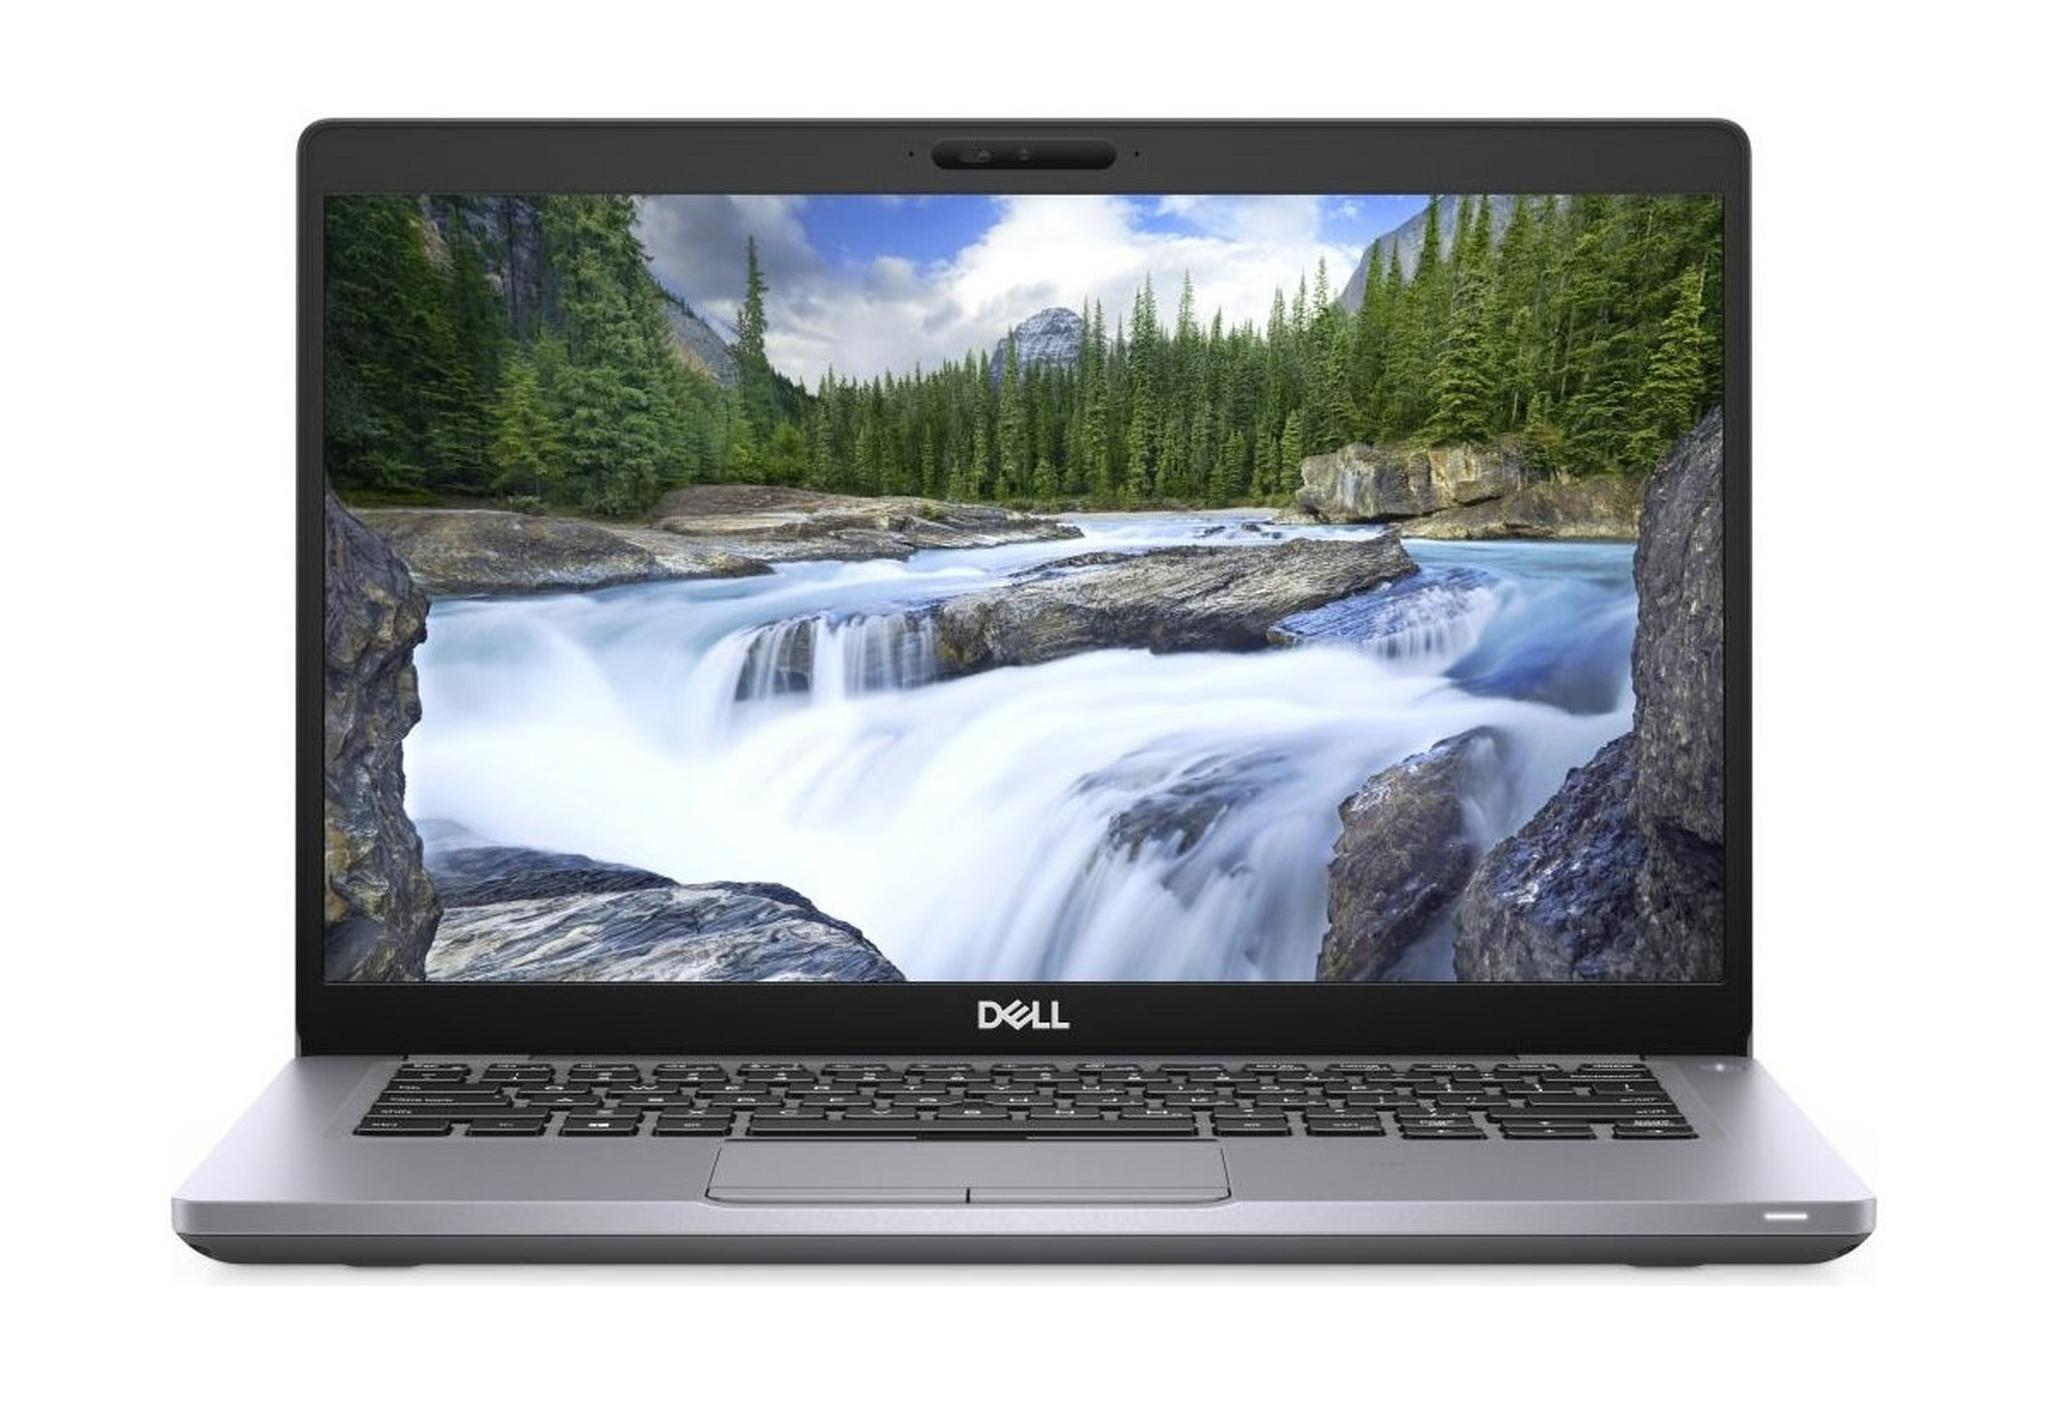 Dell Latitude Core i5 8GB RAM 1TBGB HDD 15.6-inch Business Laptop - Silver